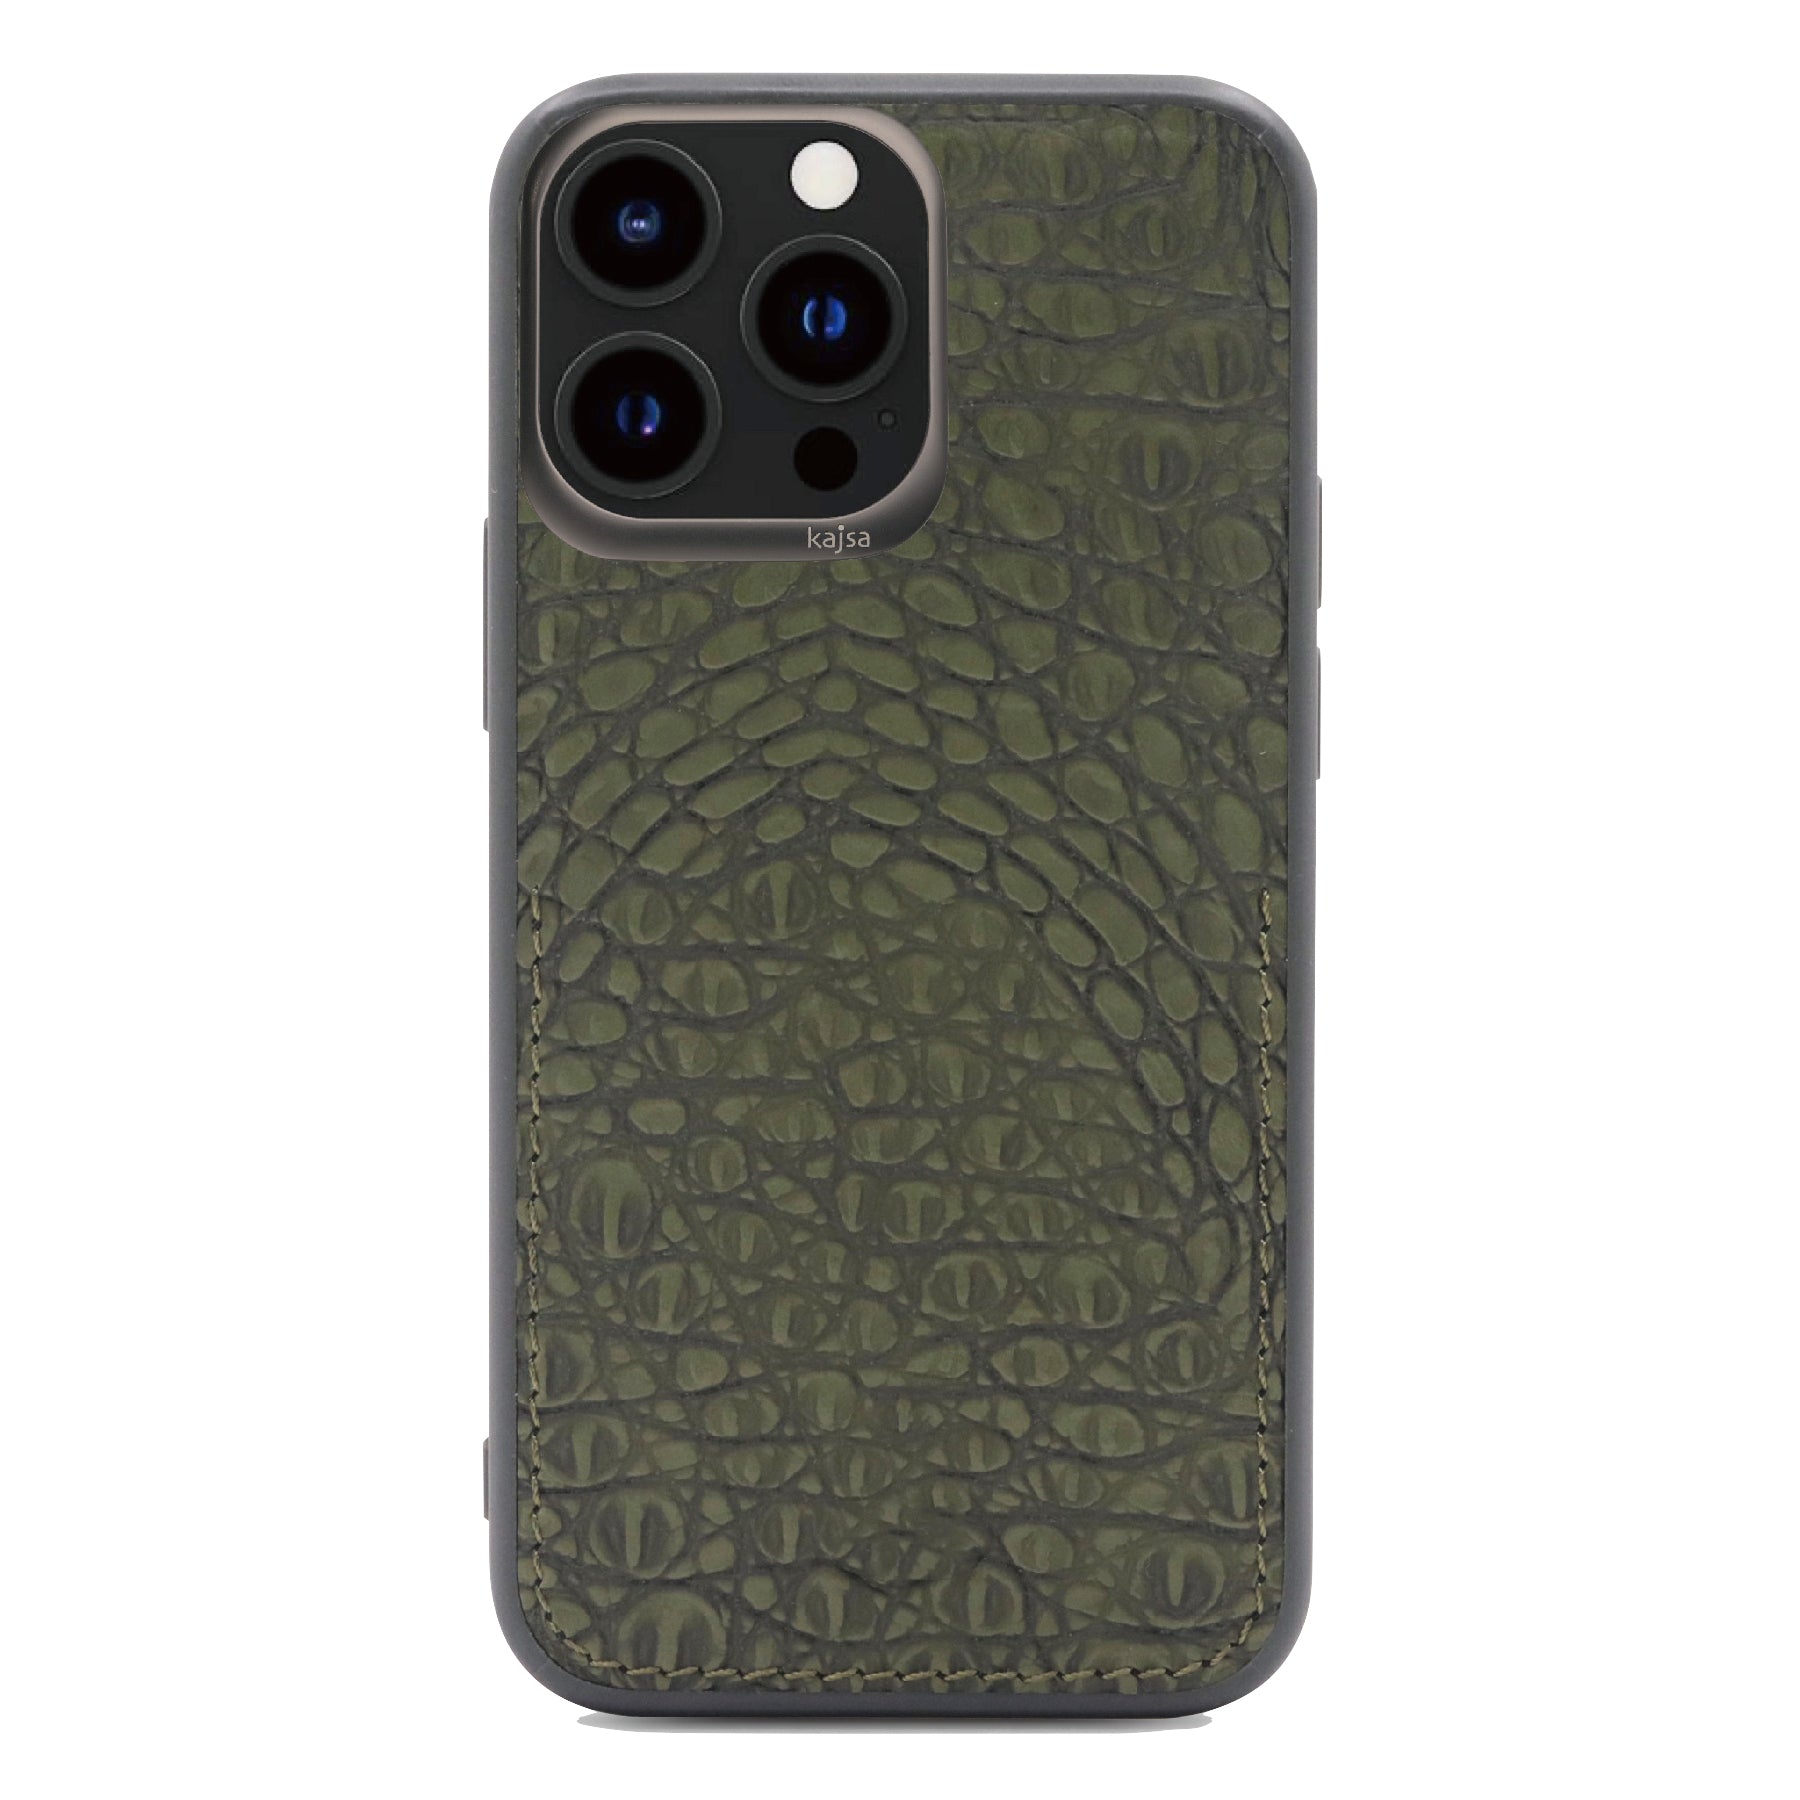 Glamorous Collection - Dirty Croco Back Case for iPhone 13-Phone Case- phone case - phone cases- phone cover- iphone cover- iphone case- iphone cases- leather case- leather cases- DIYCASE - custom case - leather cover - hand strap case - croco pattern case - snake pattern case - carbon fiber phone case - phone case brand - unique phone case - high quality - phone case brand - protective case - buy phone case hong kong - online buy phone case - iphone‎手機殼 - 客製化手機殼 - samsung ‎手機殼 - 香港手機殼 - 買電話殼